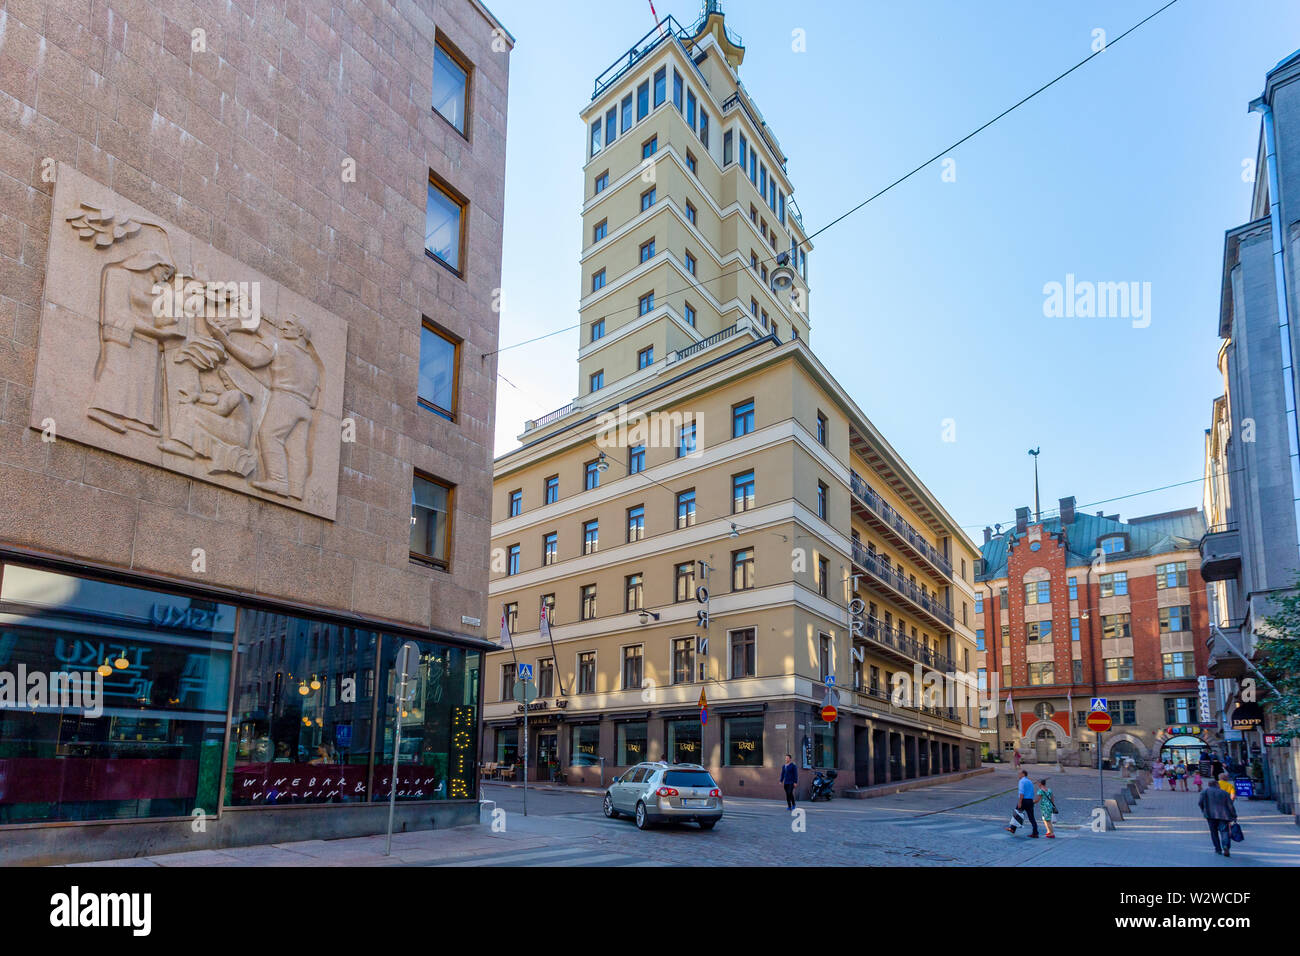 Helsinki, Finland - July 12, 2018: Hotel Torni opened in 1931 and was the tallest building in Finland until 1976 and tallest in Helsinki until 1987. Stock Photo